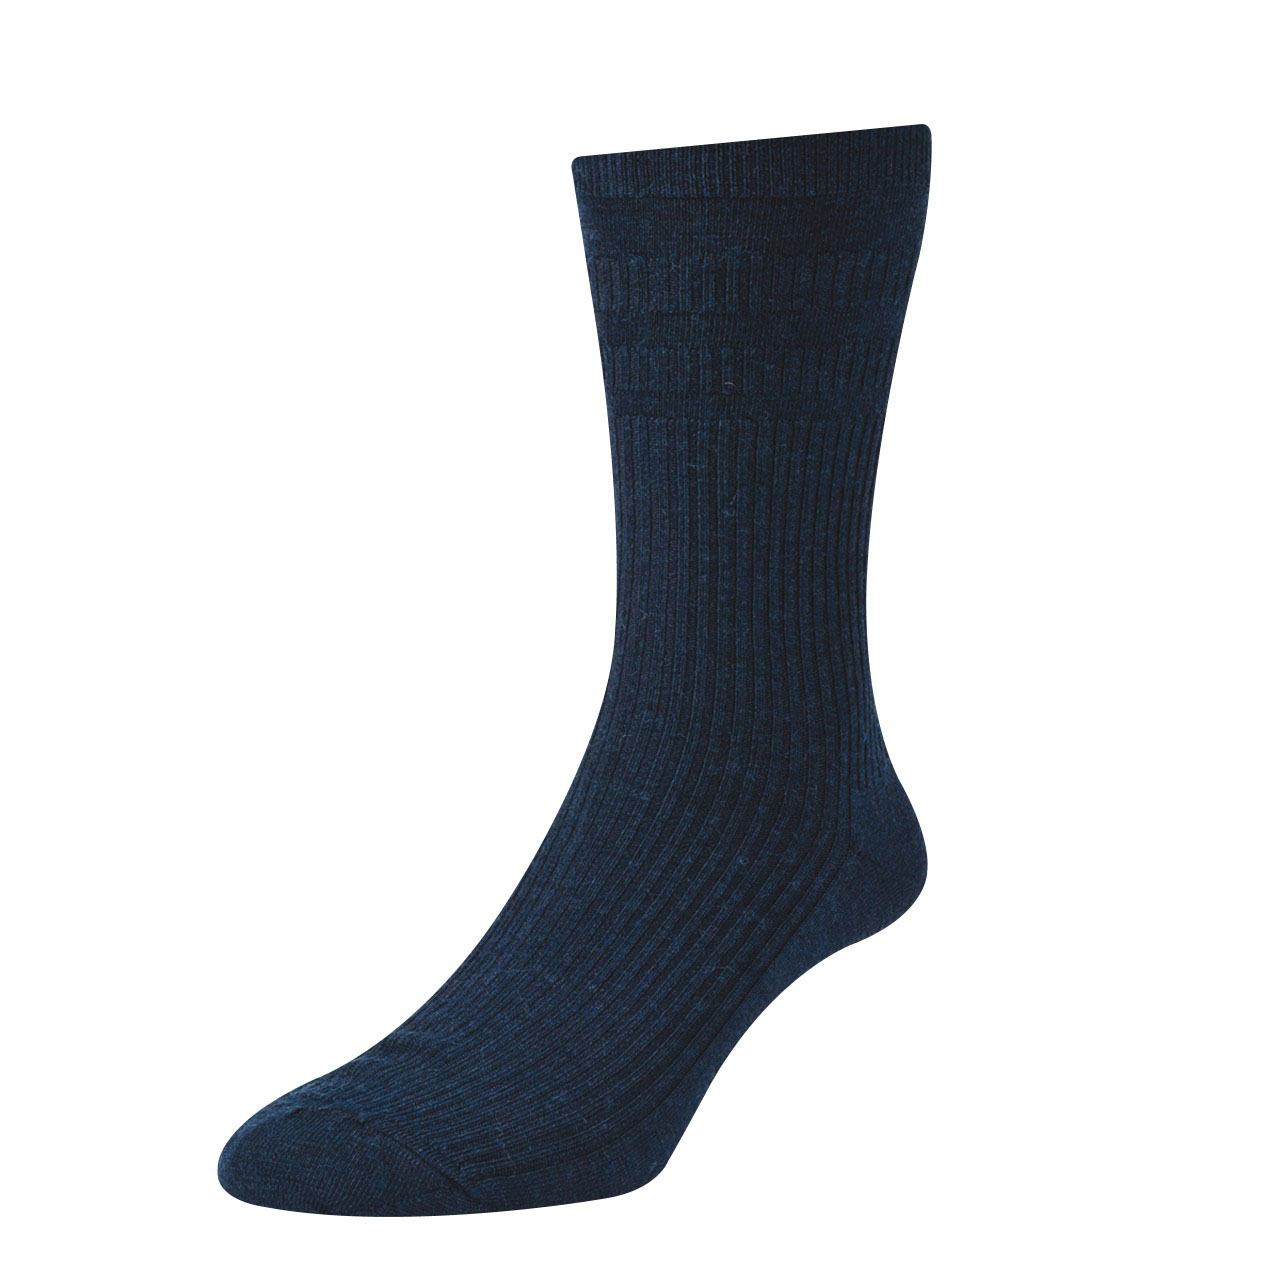 Extra-Wide Softop Socks - Wool Rich - Pack of 3